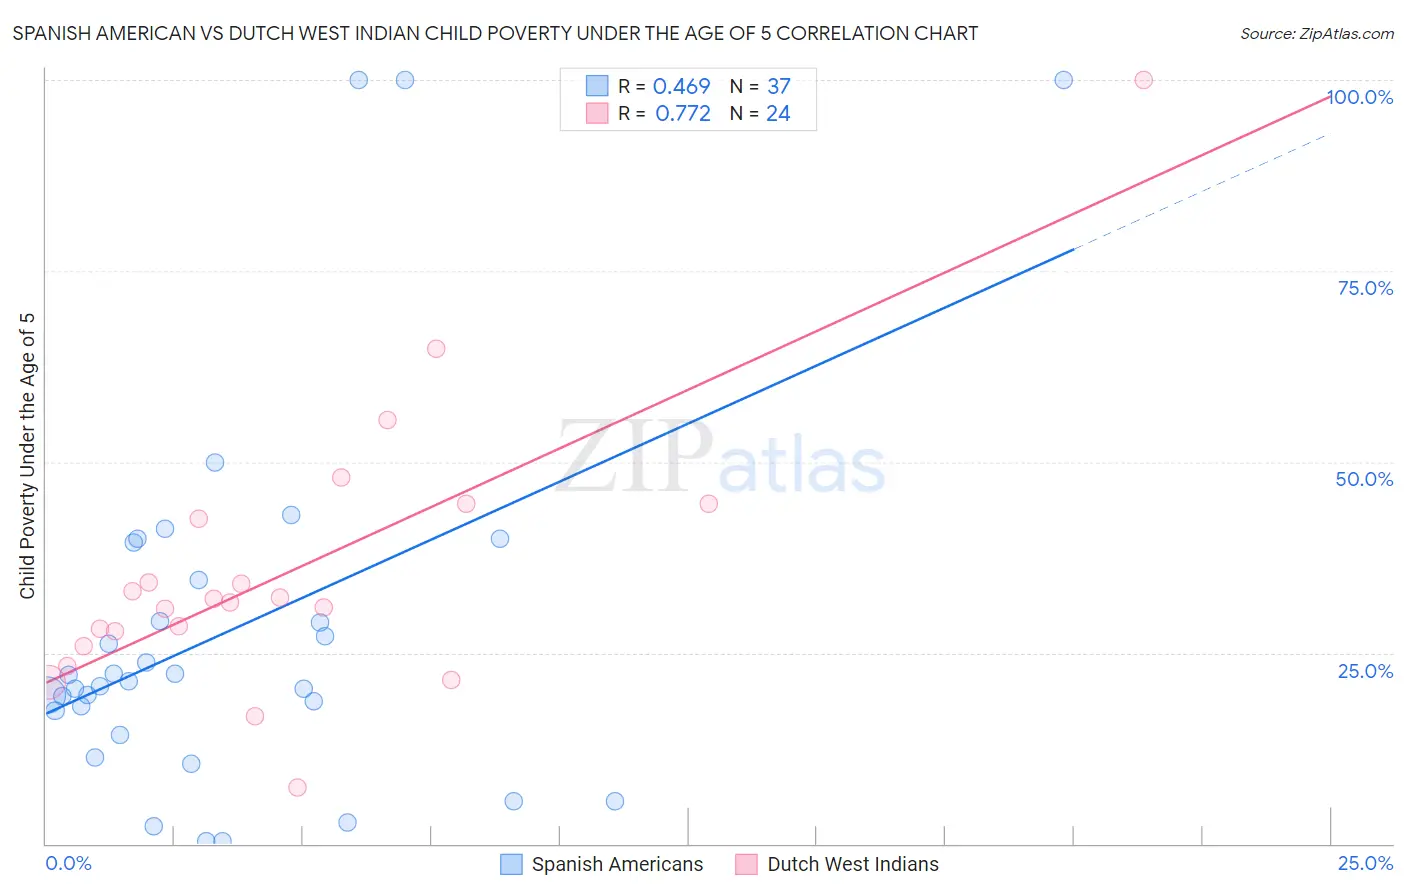 Spanish American vs Dutch West Indian Child Poverty Under the Age of 5